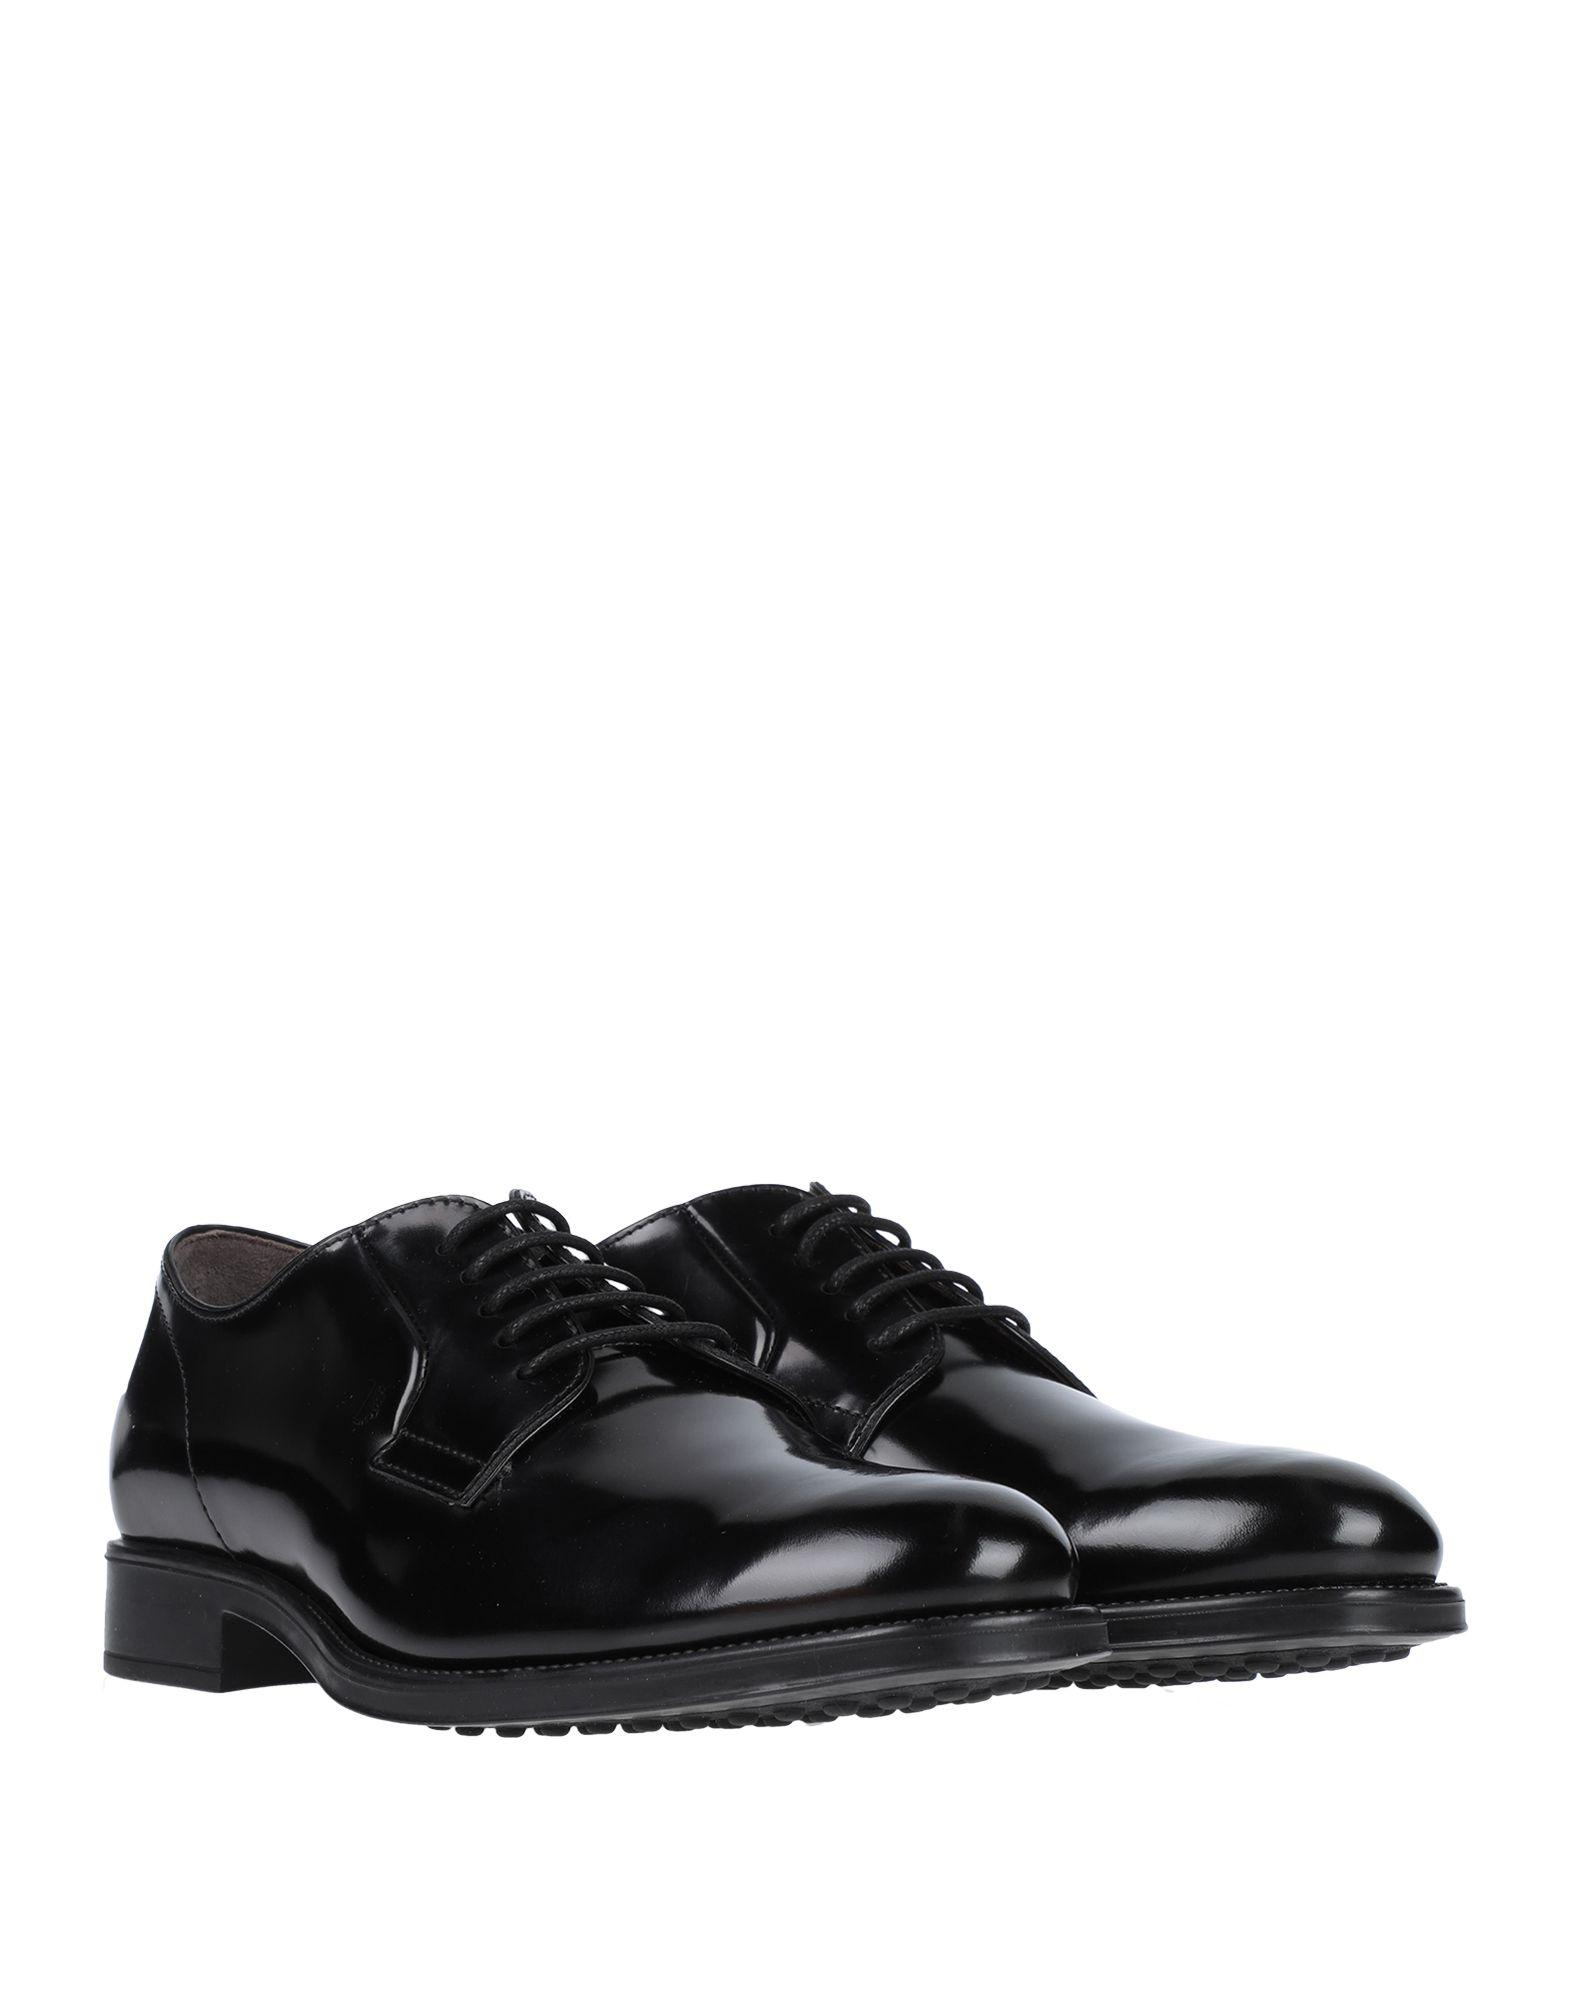 Tod's Lace-up Shoe in Black for Men - Lyst